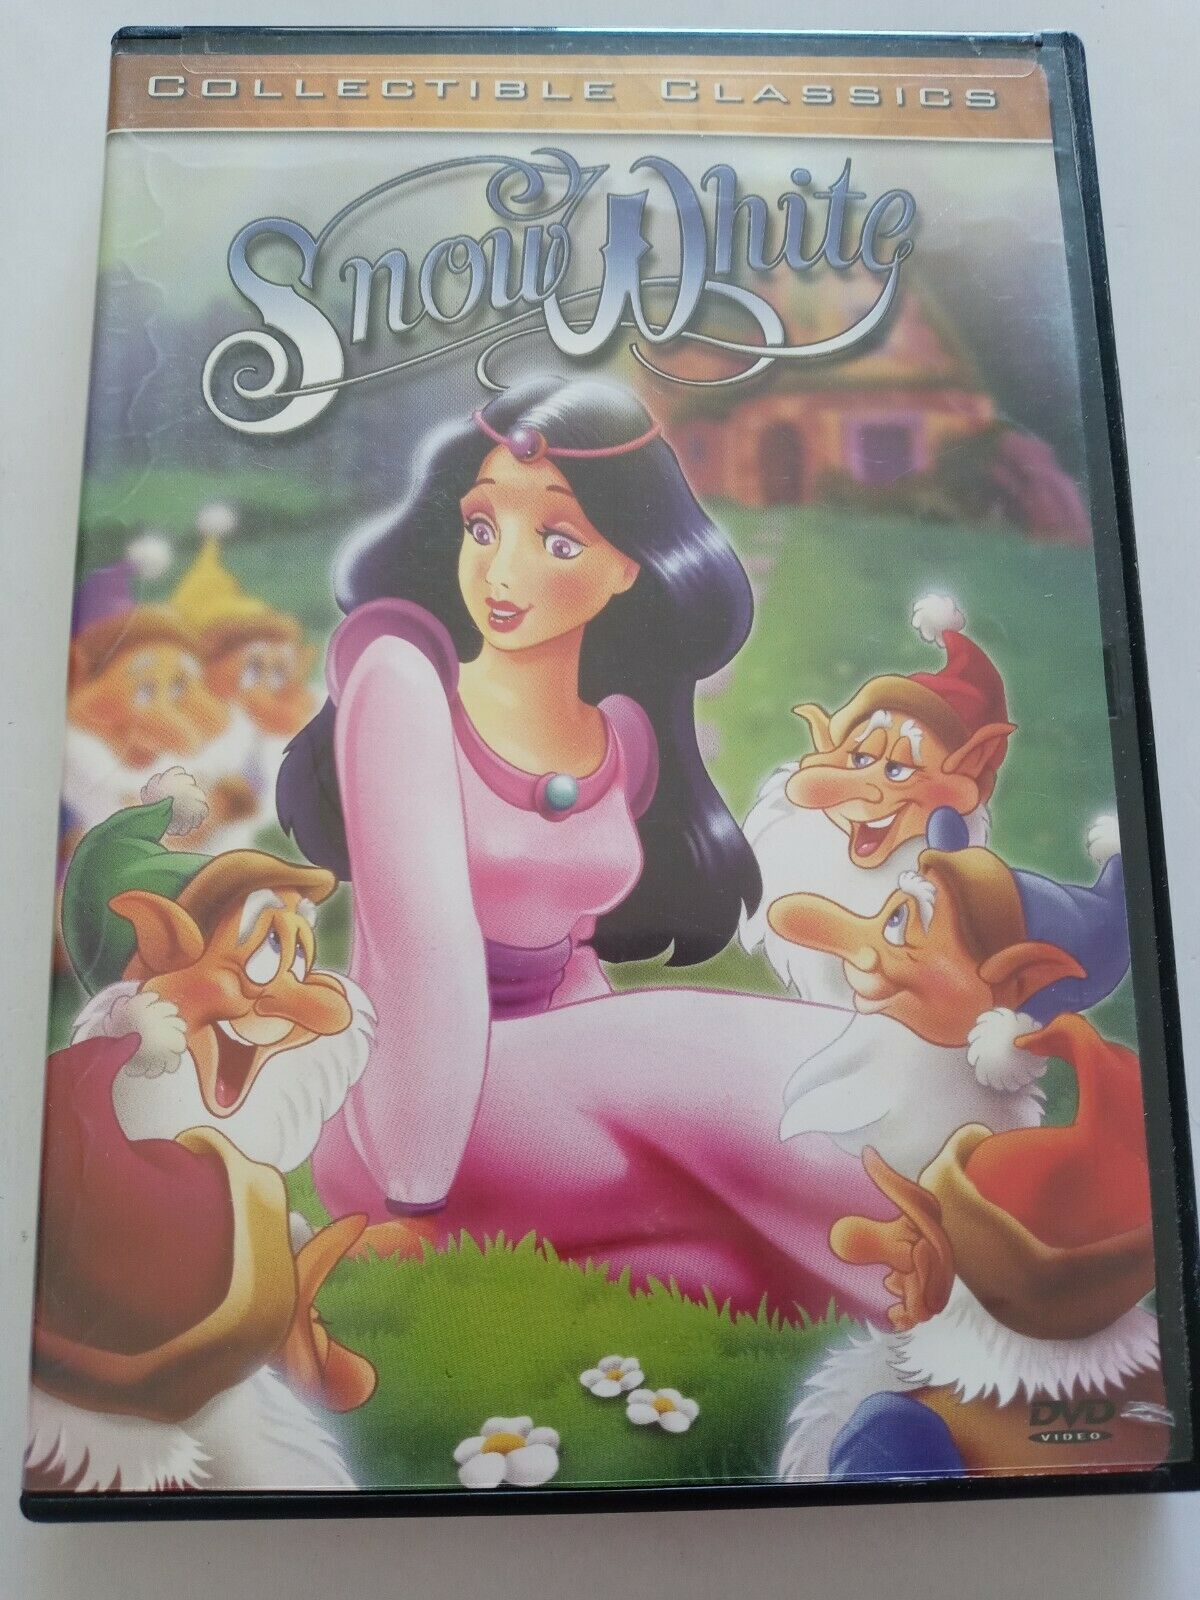 Primary image for Snow White (DVD, 2002)